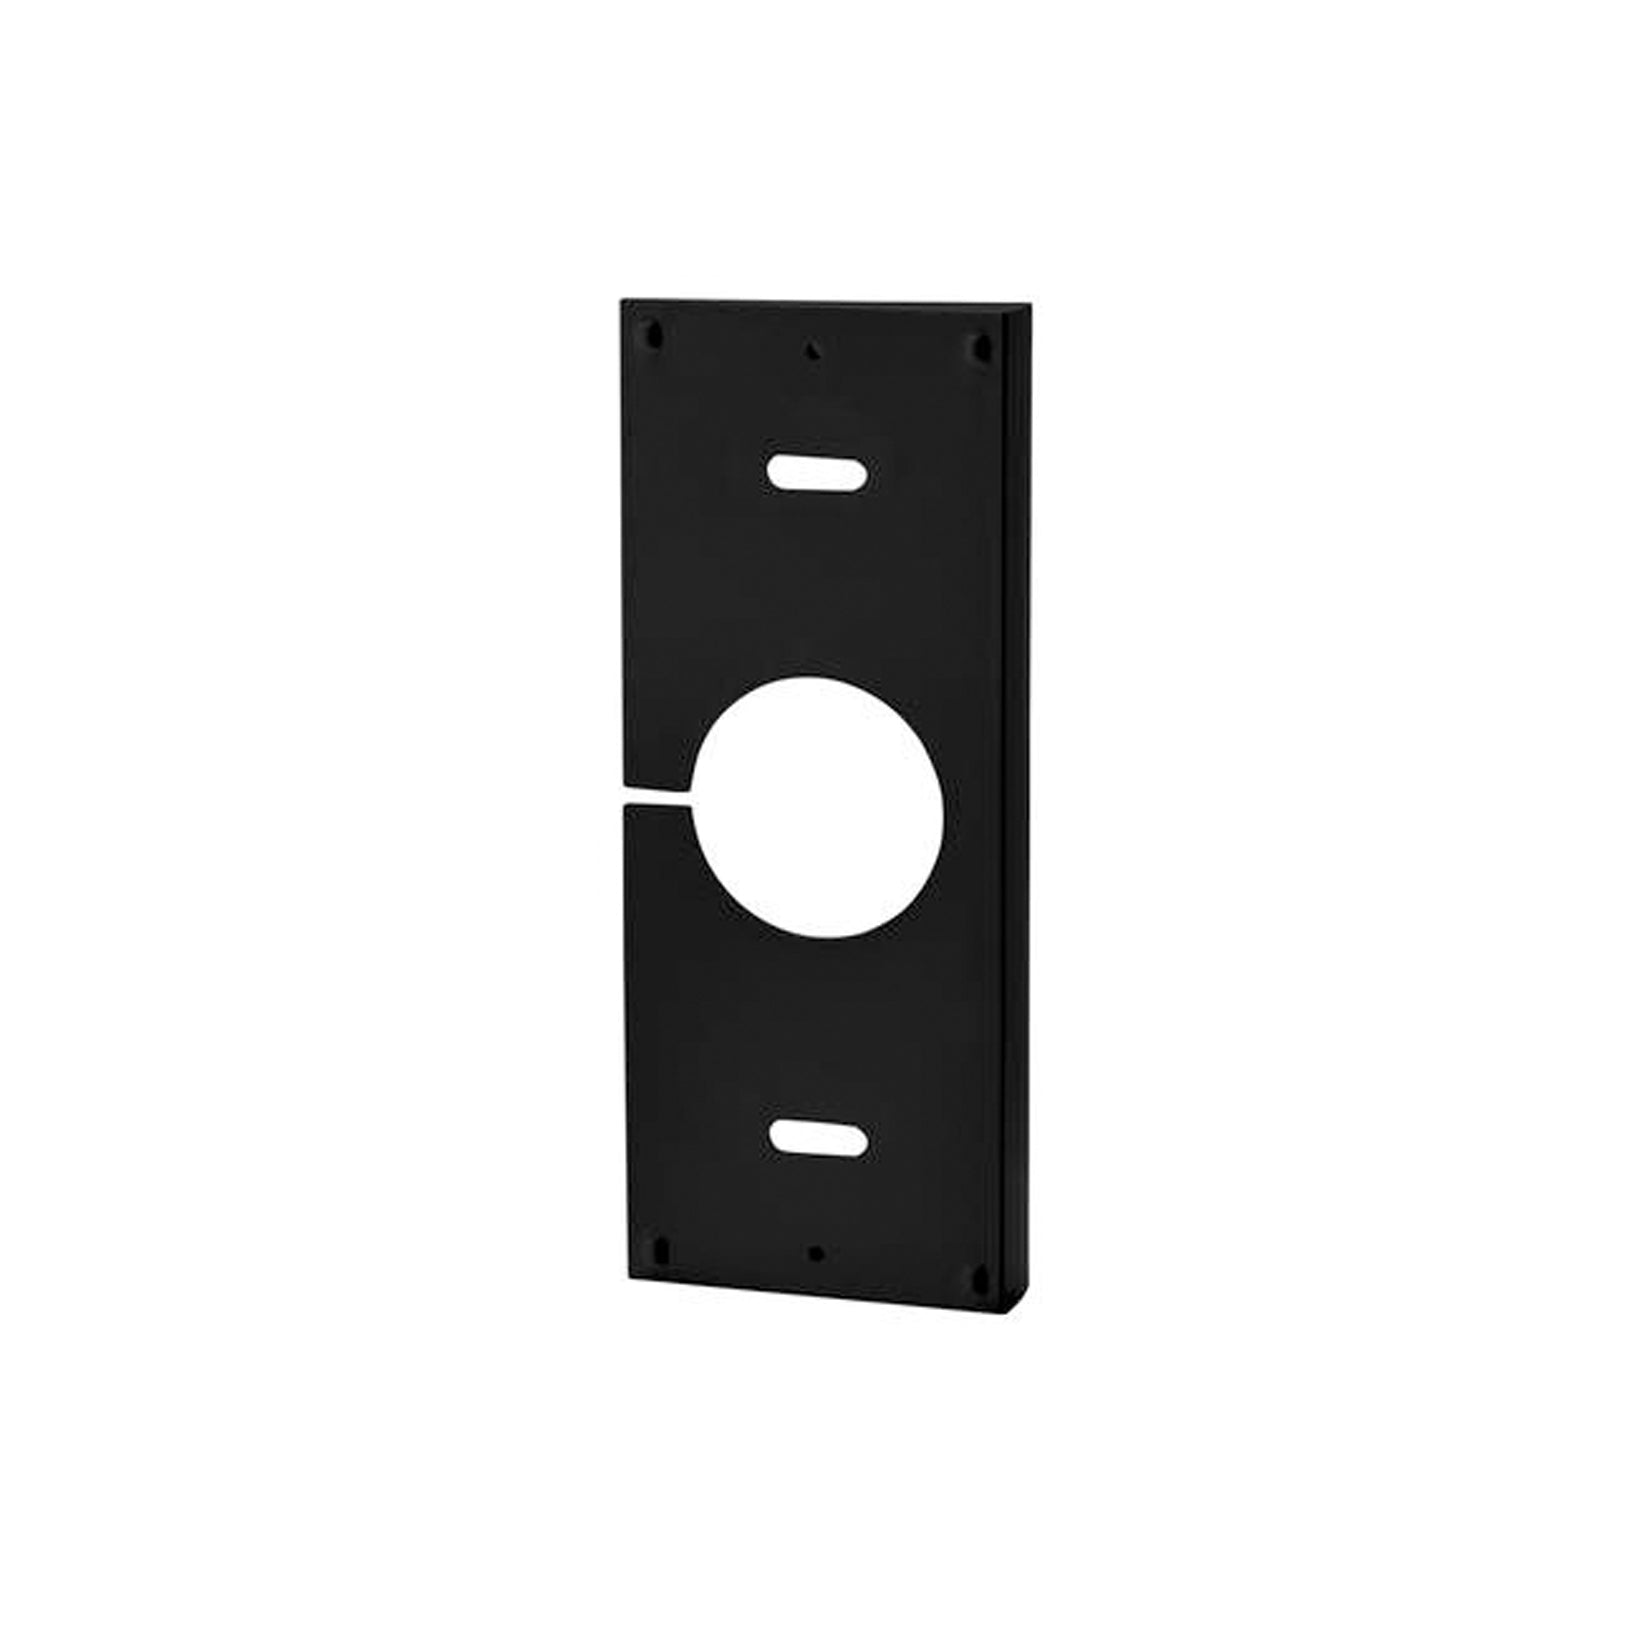 Ring Corner Kit Mounting for Video Doorbell Pro (side to side angles)